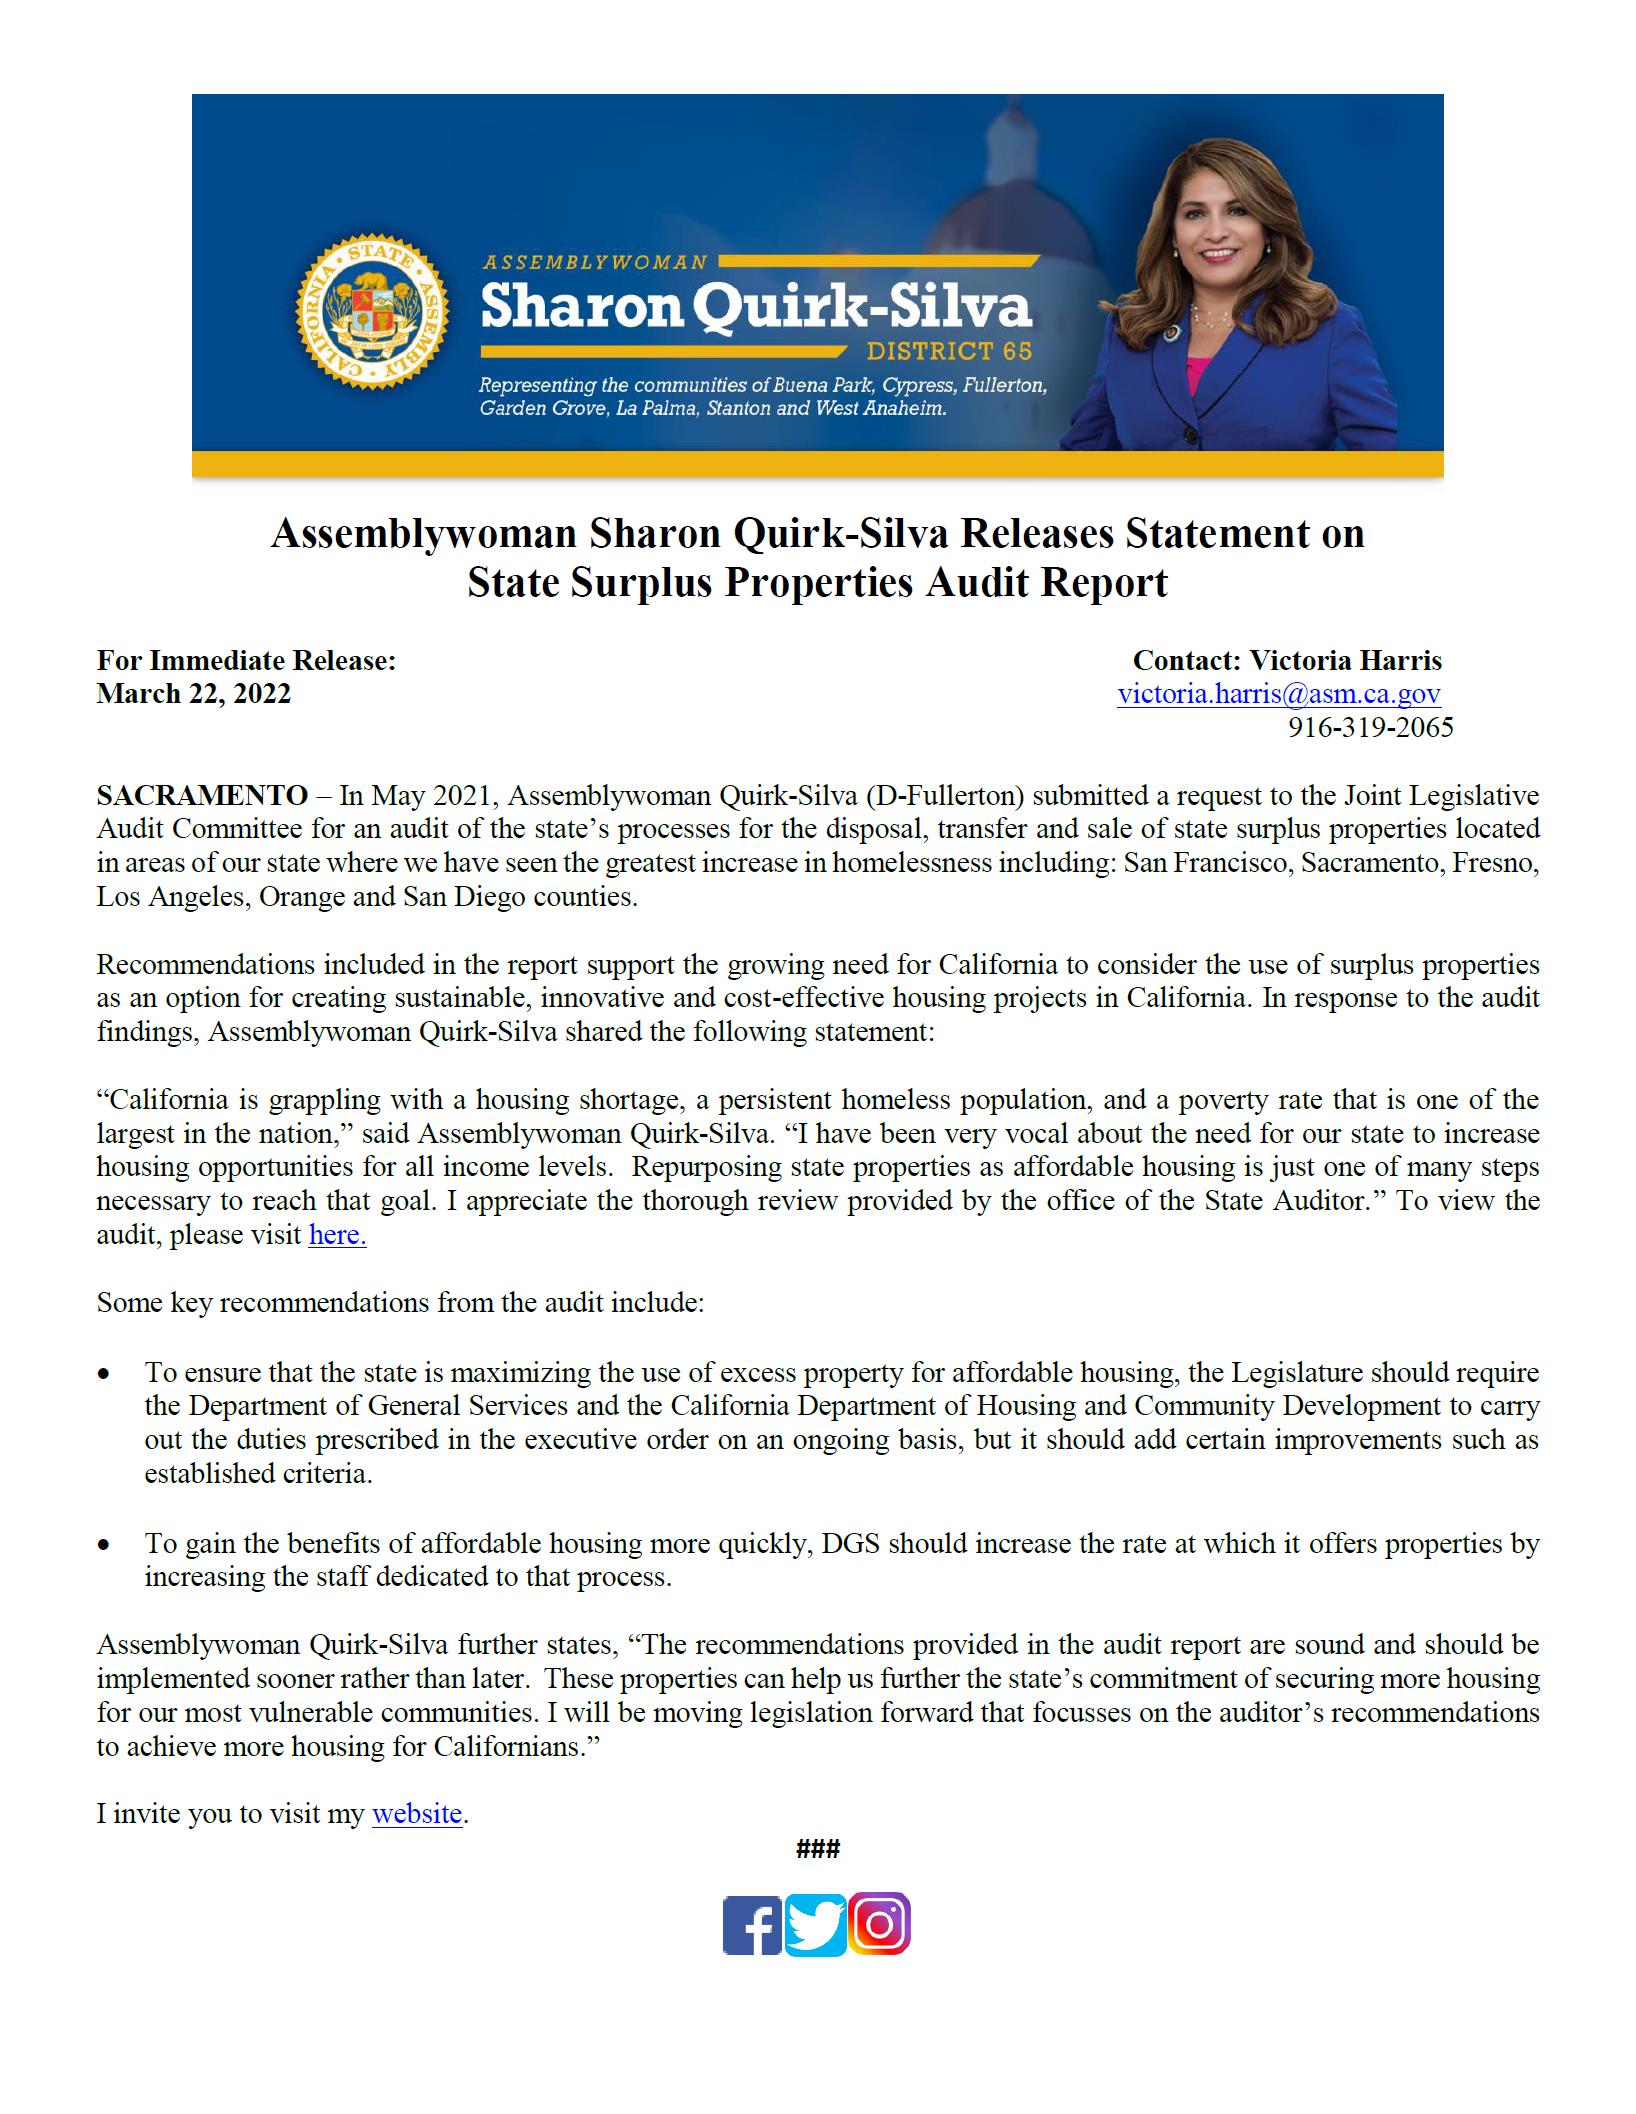 Assemblywoman Sharon Quirk-Silva Releases Statement on State Surplus Properties Audit Report